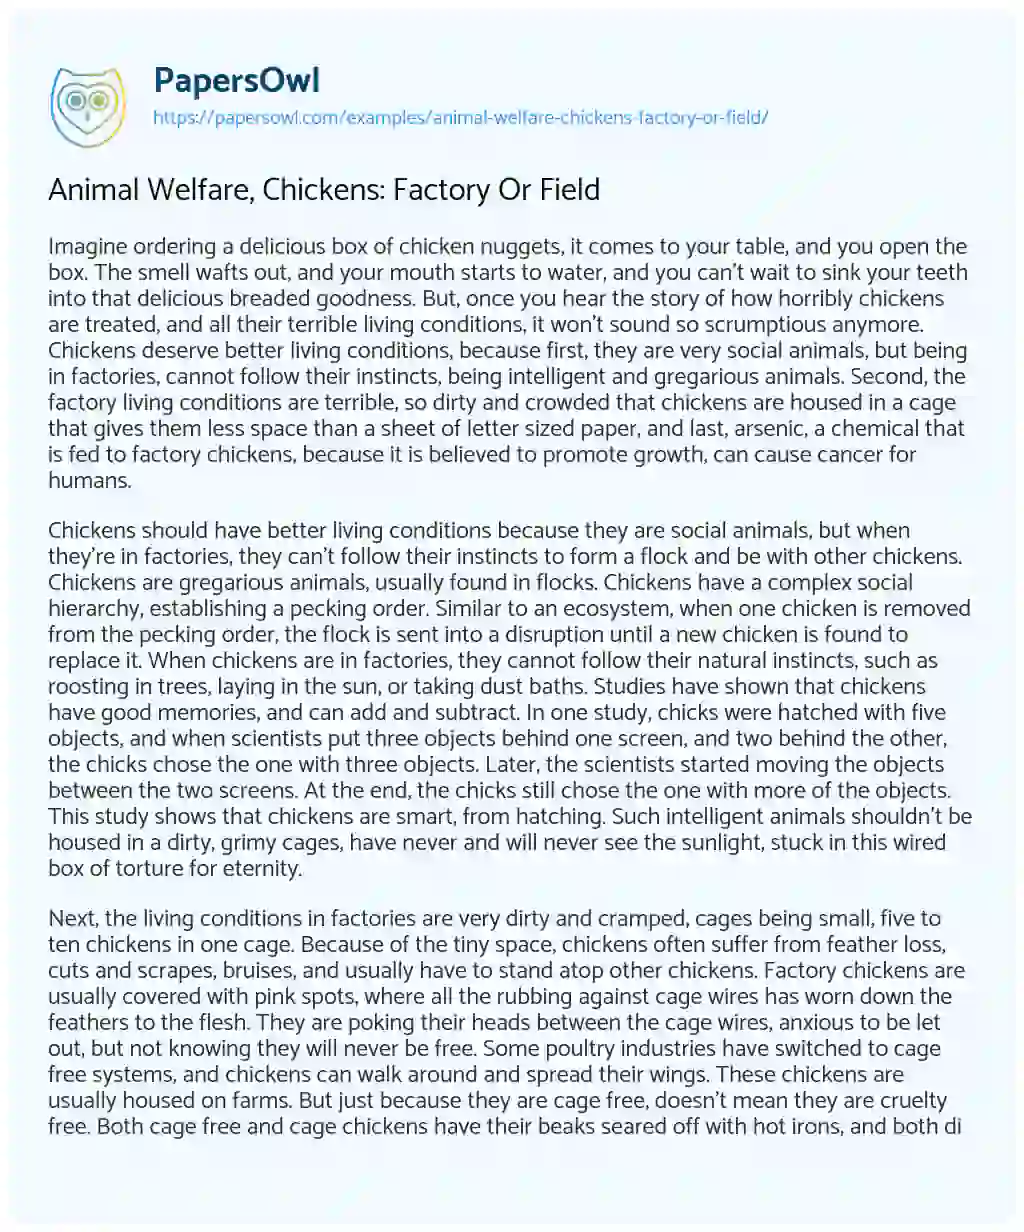 Essay on Animal Welfare, Chickens: Factory or Field